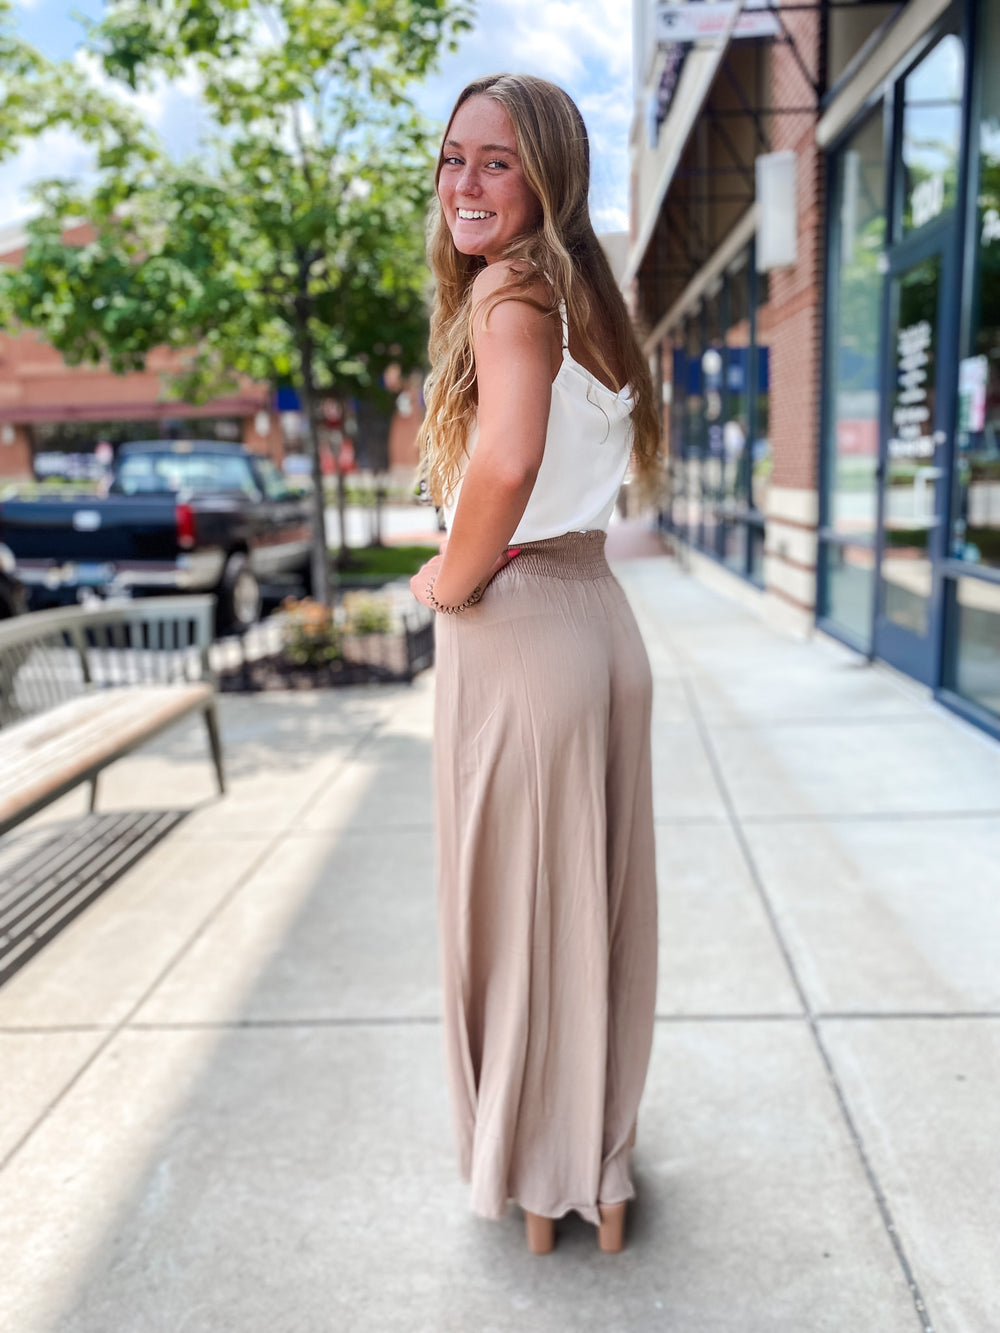 Bailey Pants - Sienna Sky Boutique